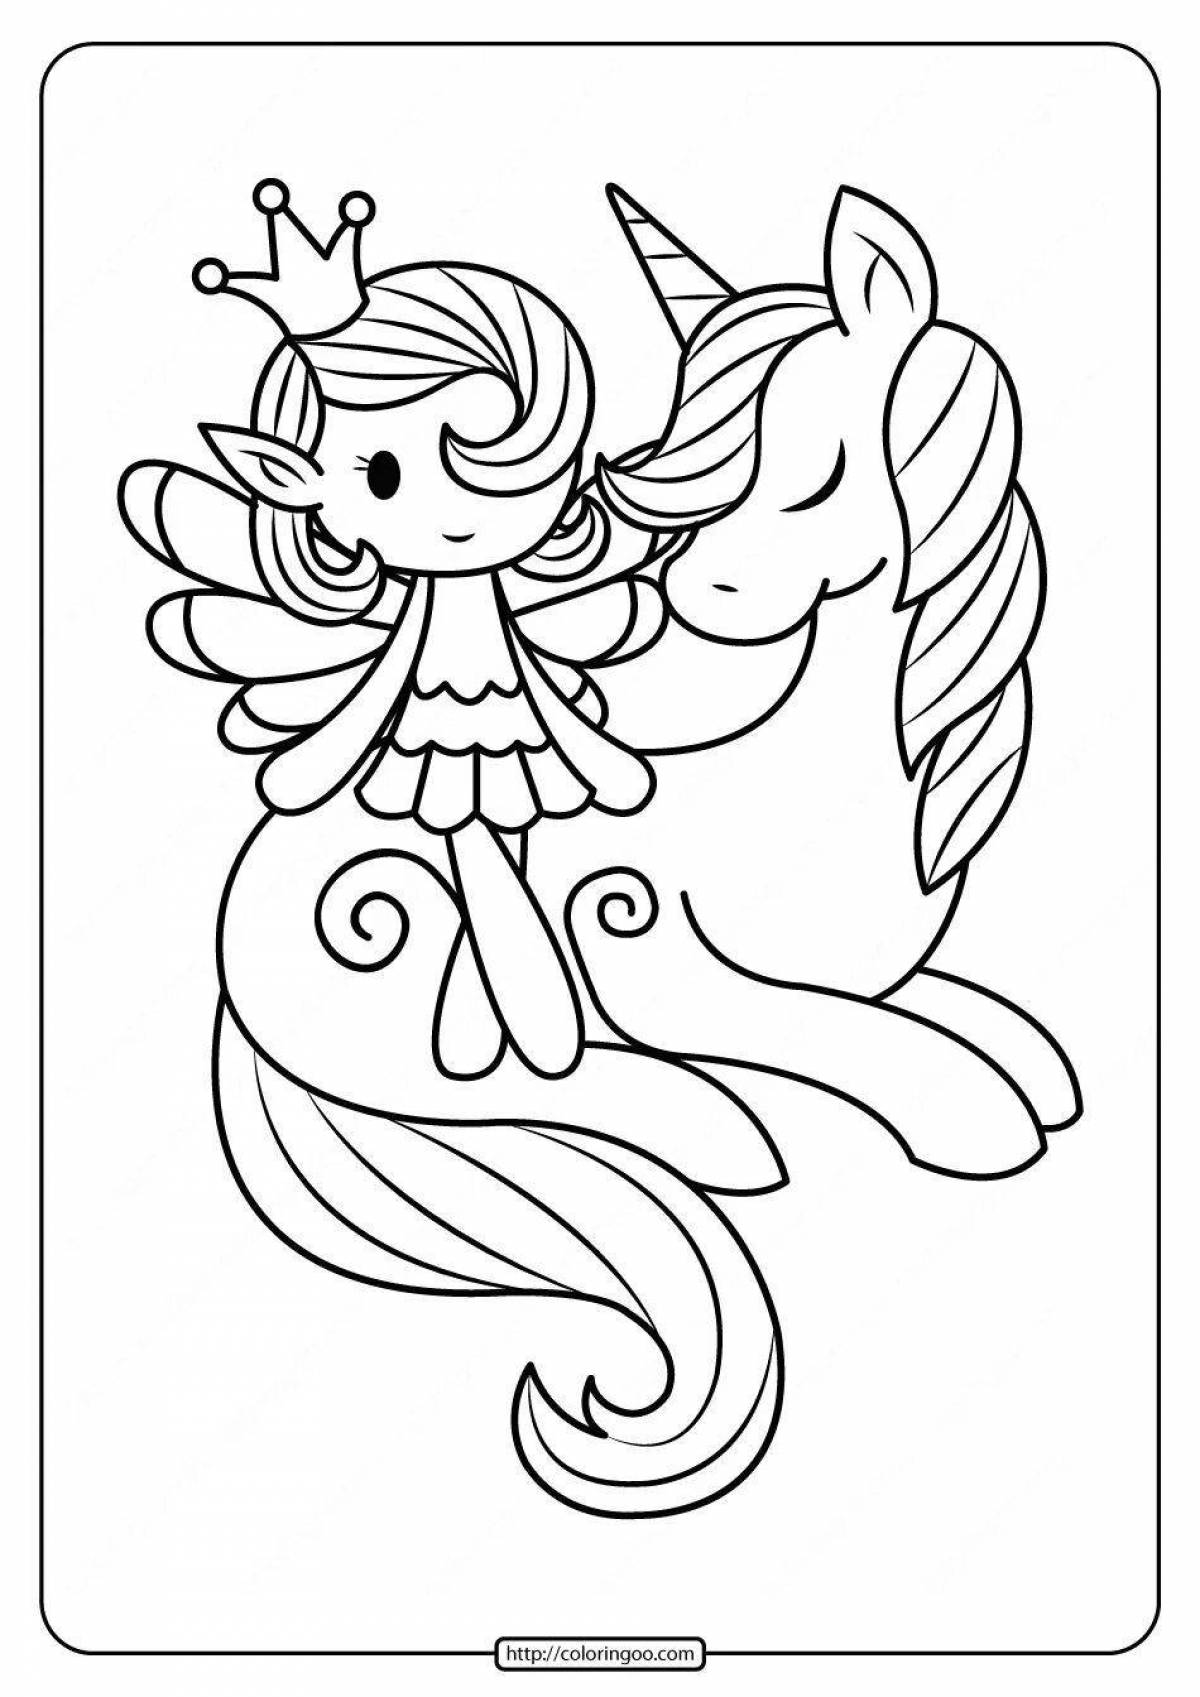 Great coloring book fairies and unicorns